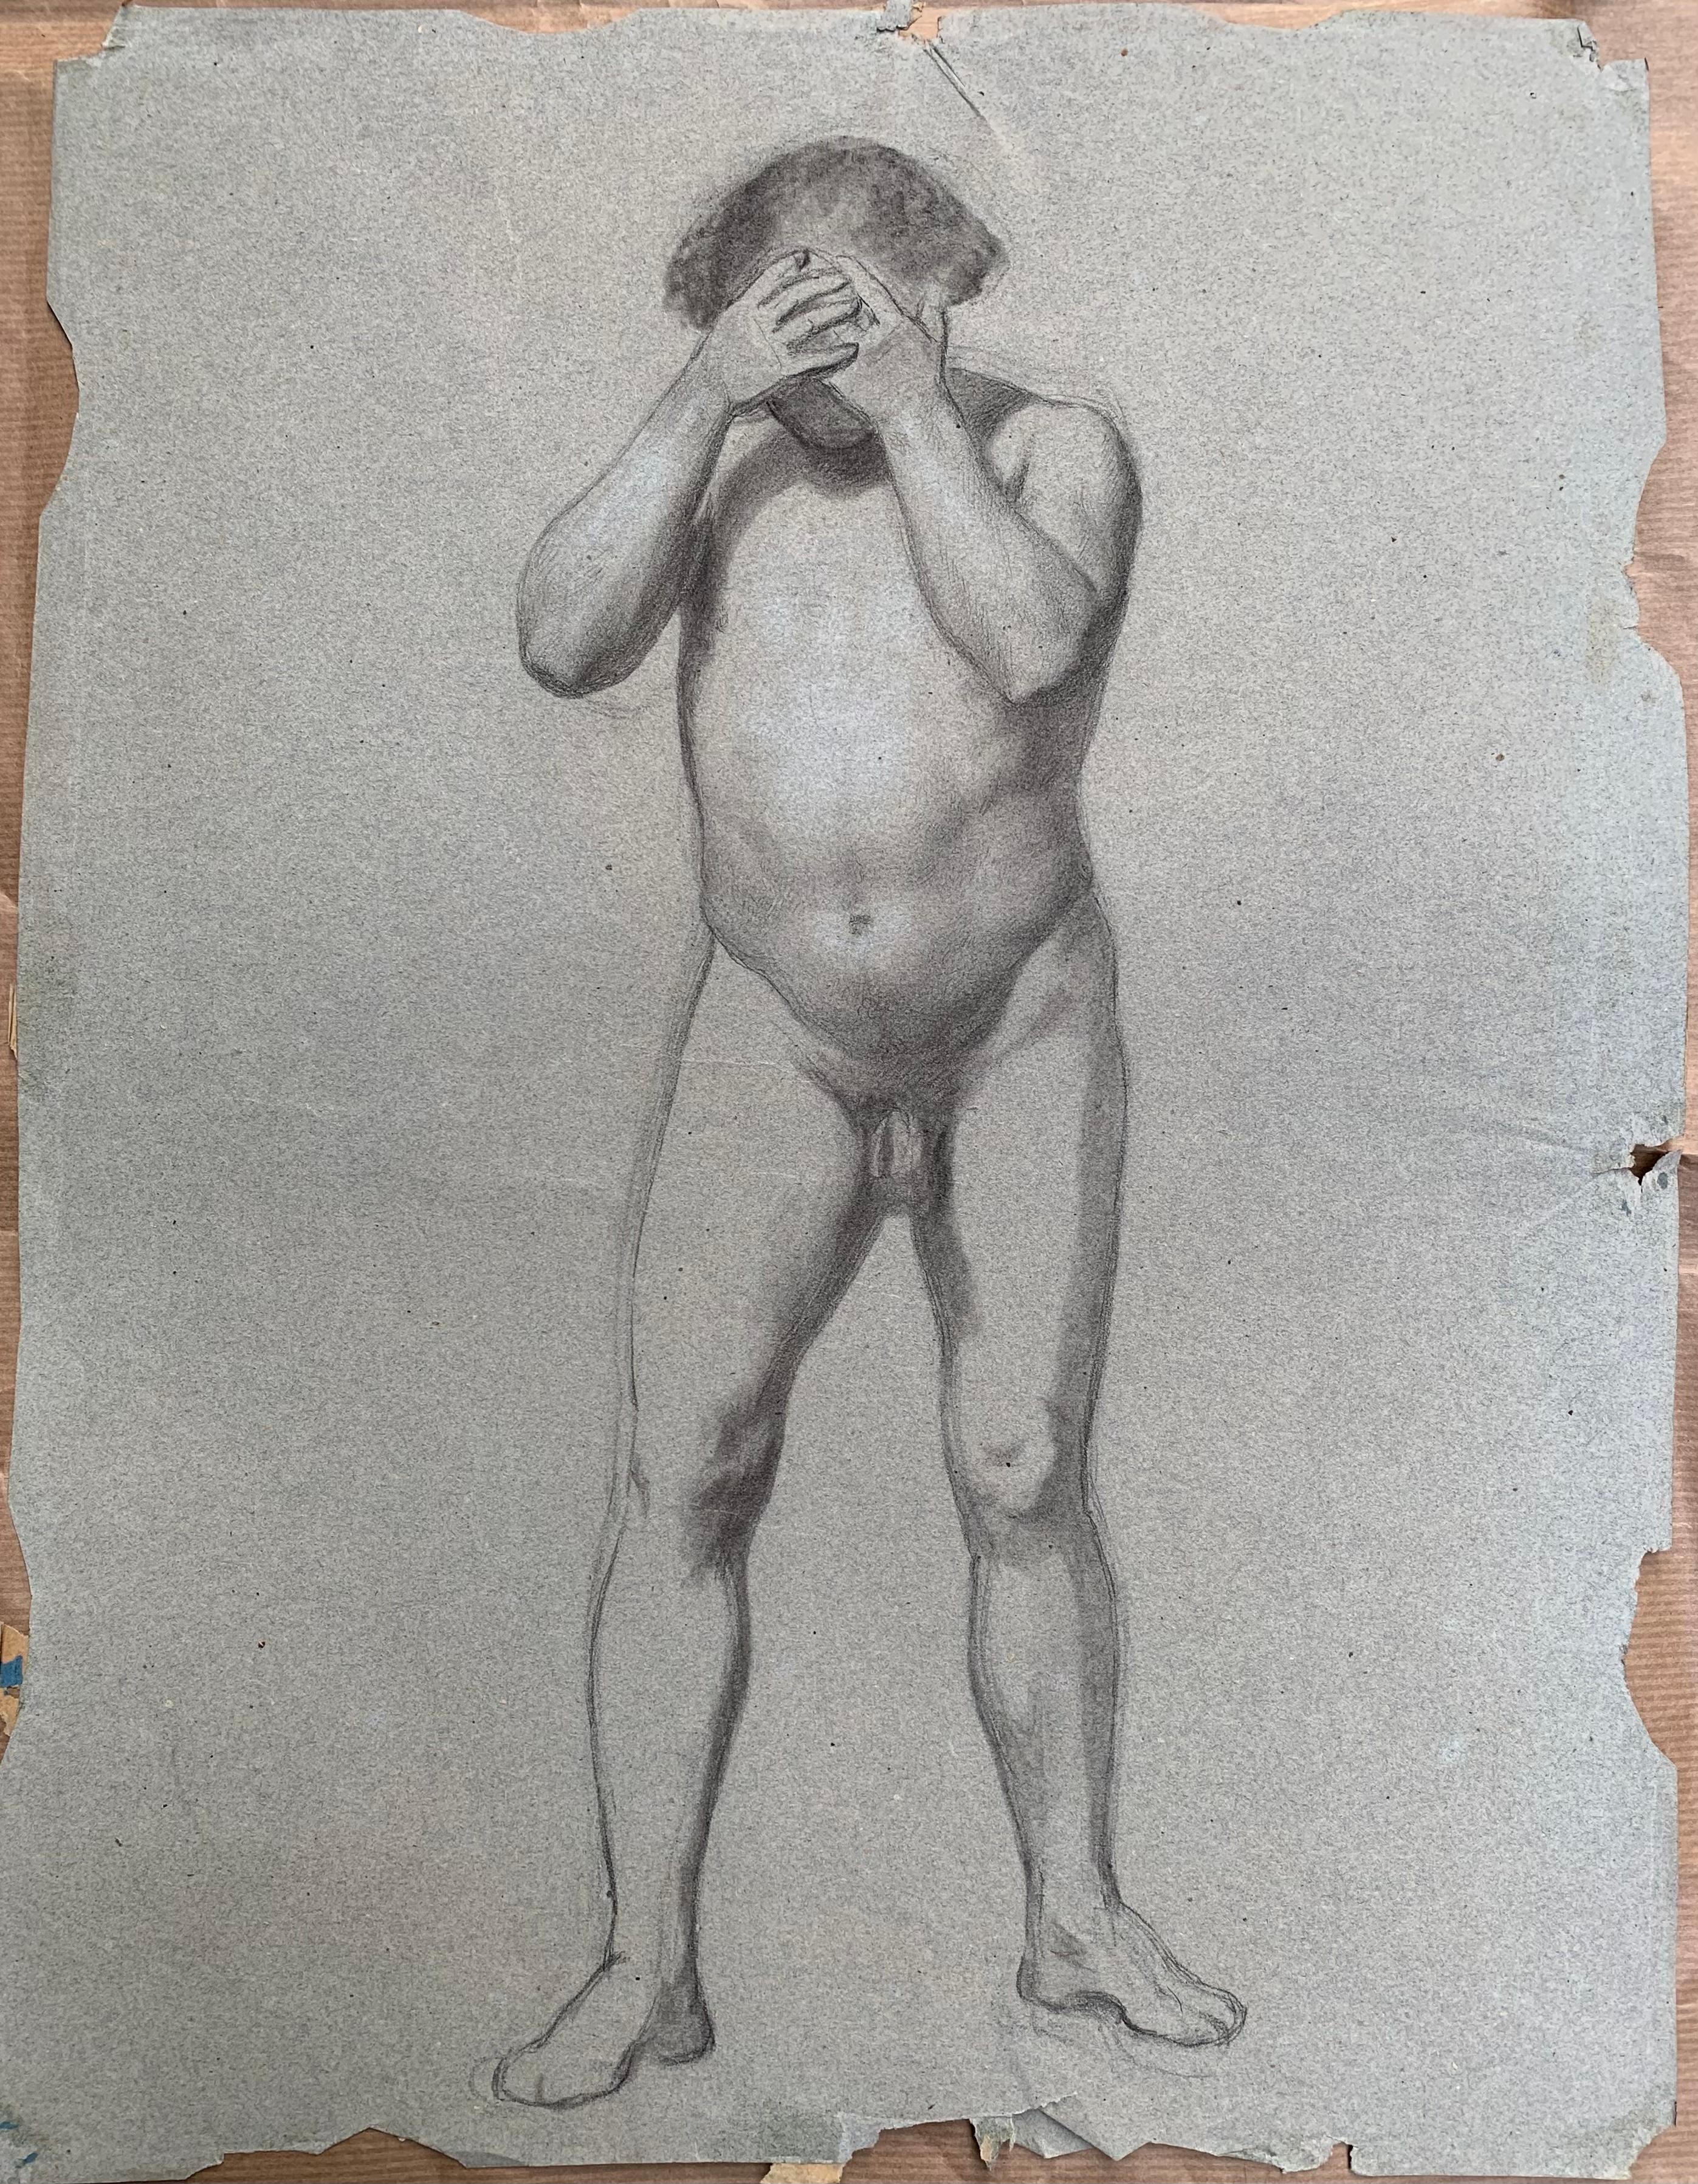 Preparatory anatomical study for the figure of a man with hands on his face. For Sale 10